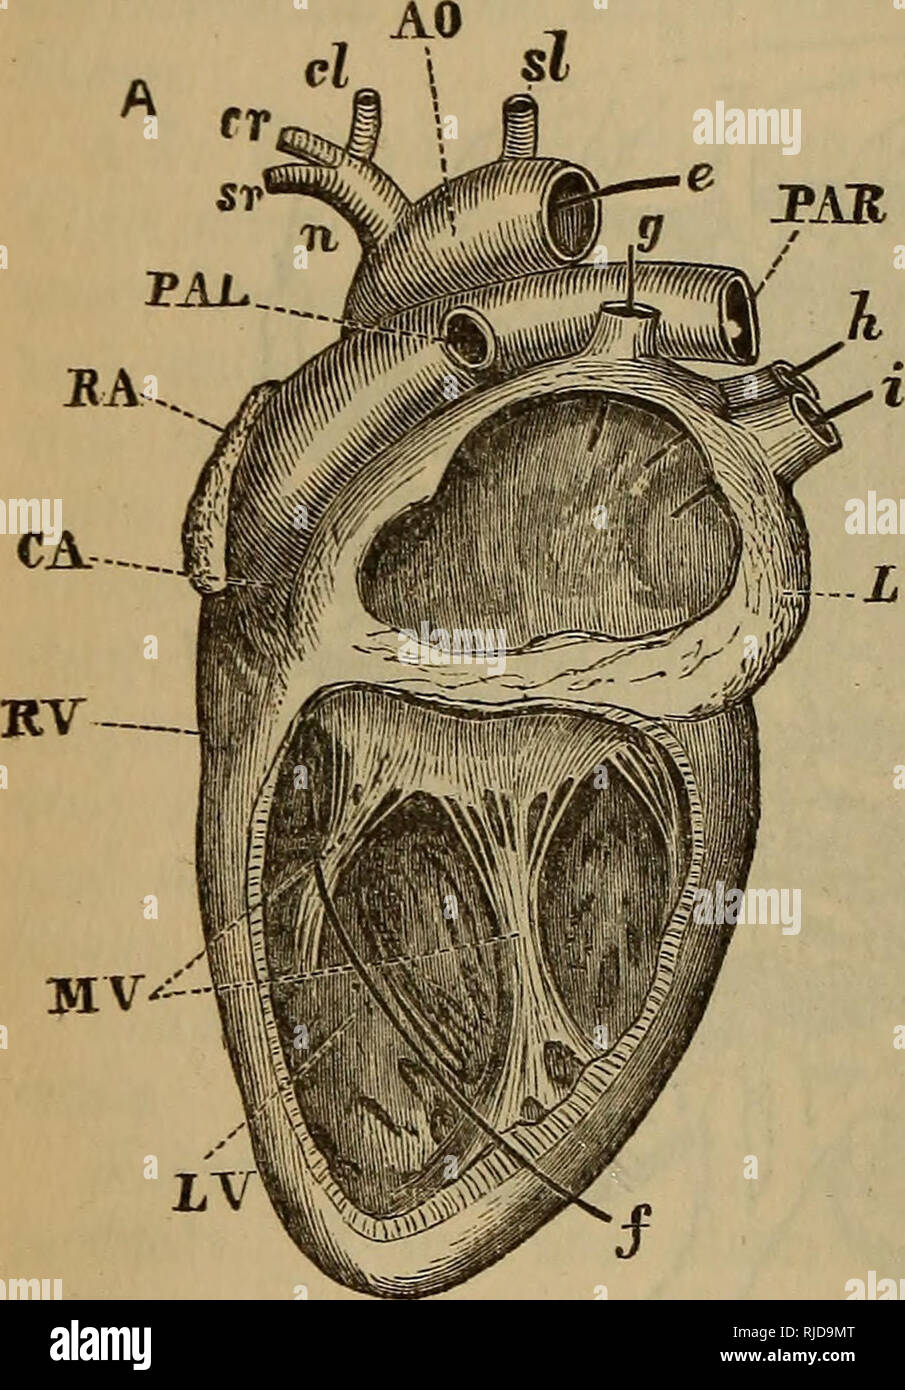 . The cat : an introduction to the study of backboned animals, especially mammals. Cats; Anatomy, Comparative. 200 TEE CAT. [chap. VII. are called auricles, and the other two, ventricles—one of each on each side. The auricle and ventricle of the right side are com- pletely divided off from those of the left side. The auricles open, into the ventricles by valvular apertures, and valves guard the openings of the great vessels. Such being a summary of its main characters, its various parts need examination in detail. The heart of the cat lies on the ventral side of the body, within. LV. Please no Stock Photo